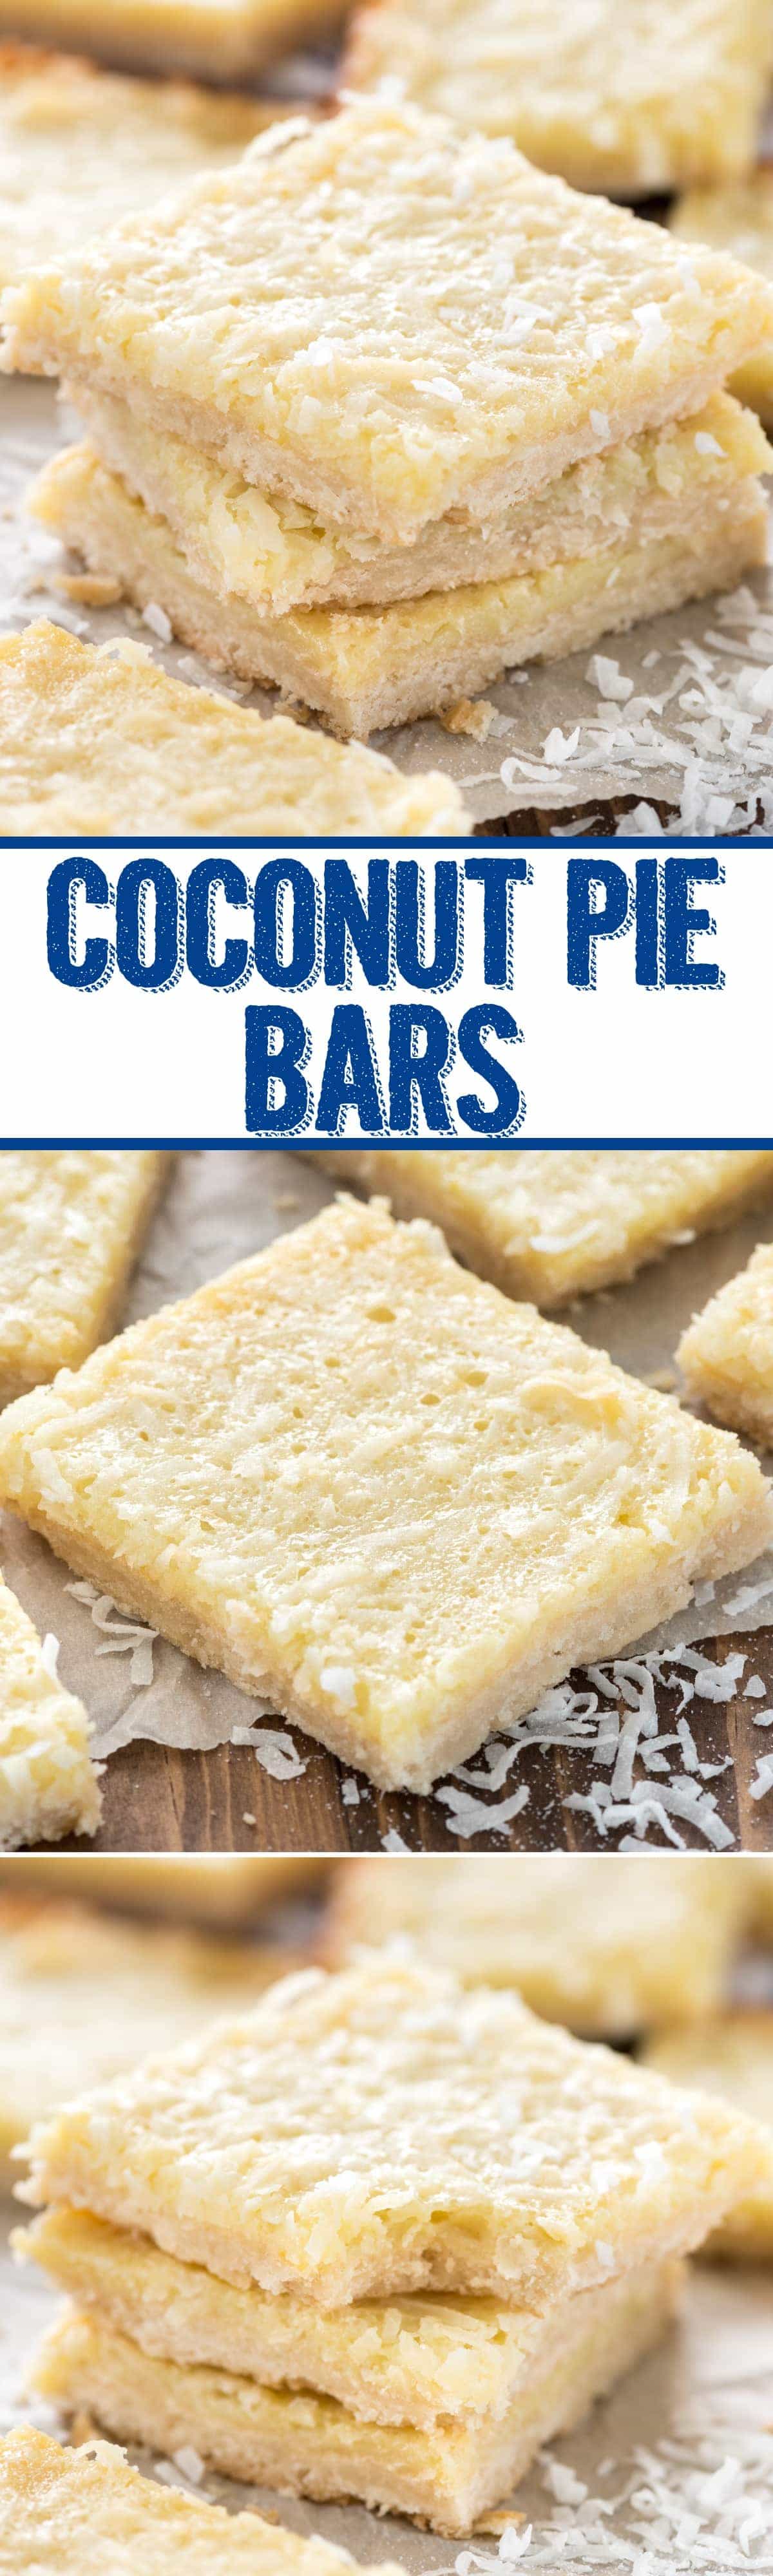 Gooey Coconut Pie Bars - this easy bar recipe has a shortbread crust topped with a gooey coconut filling. The perfect gooey coconut bar!